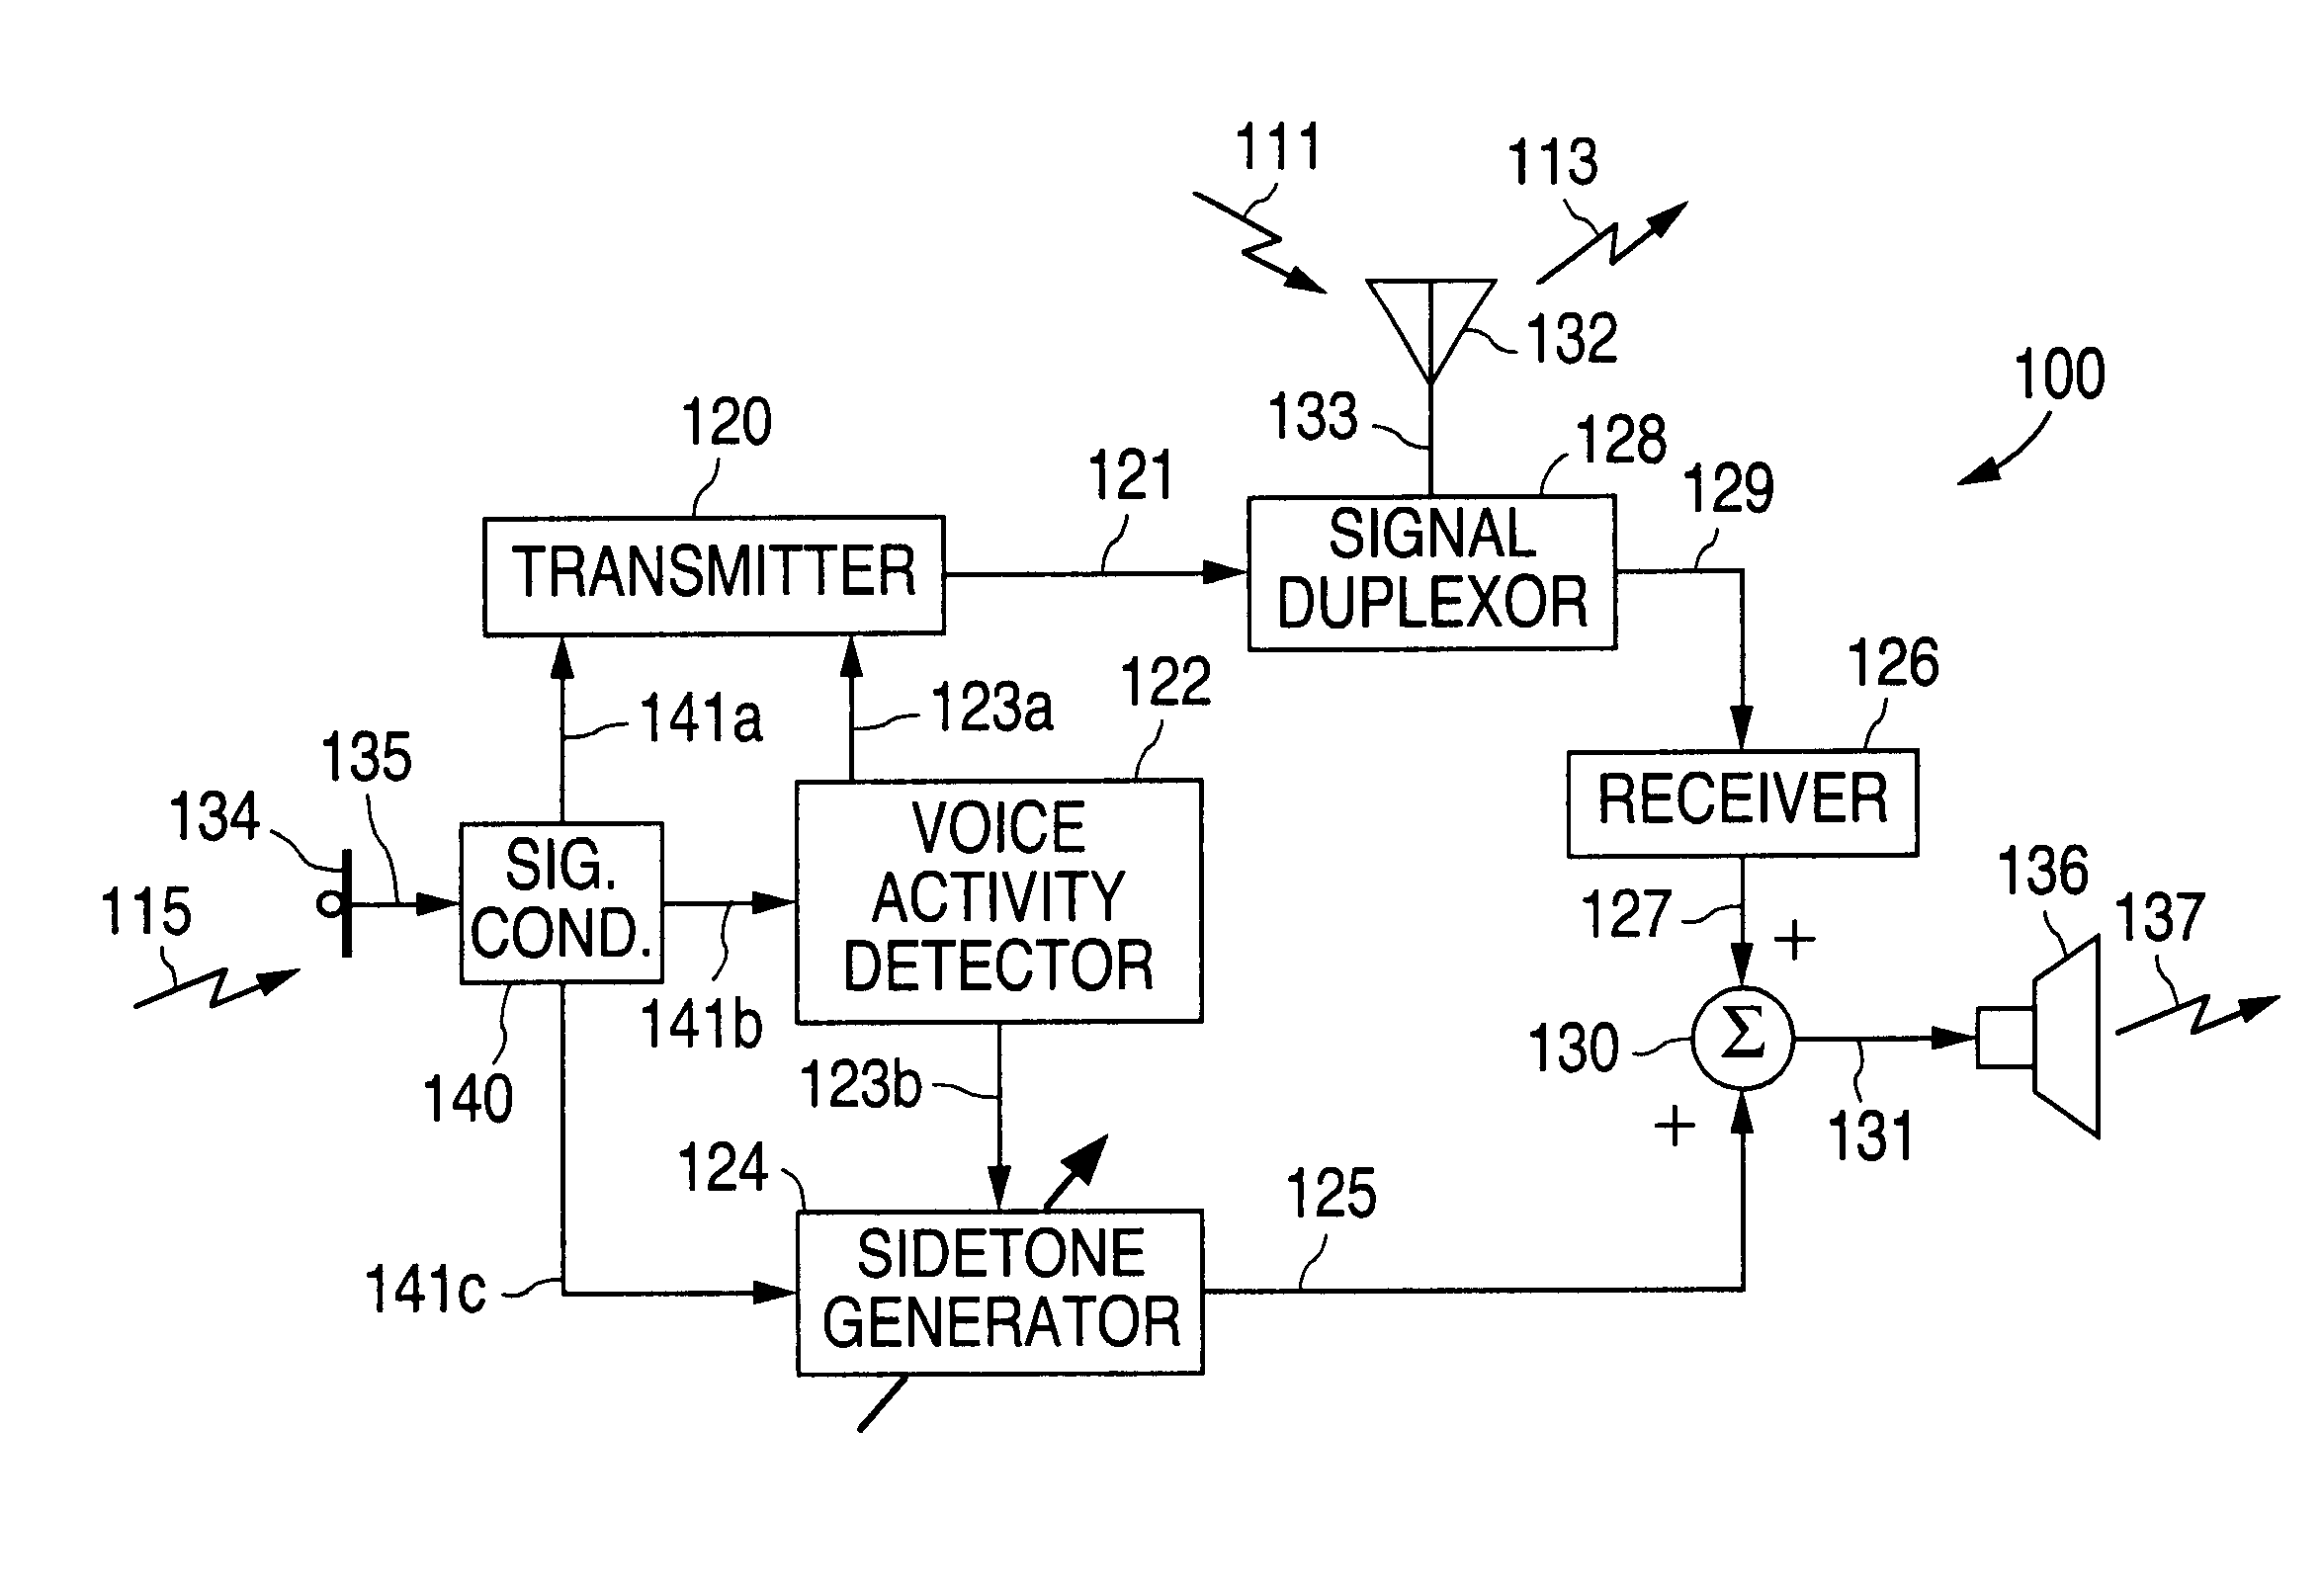 Telephone receiver circuit with dynamic sidetone signal generator controlled by voice activity detection